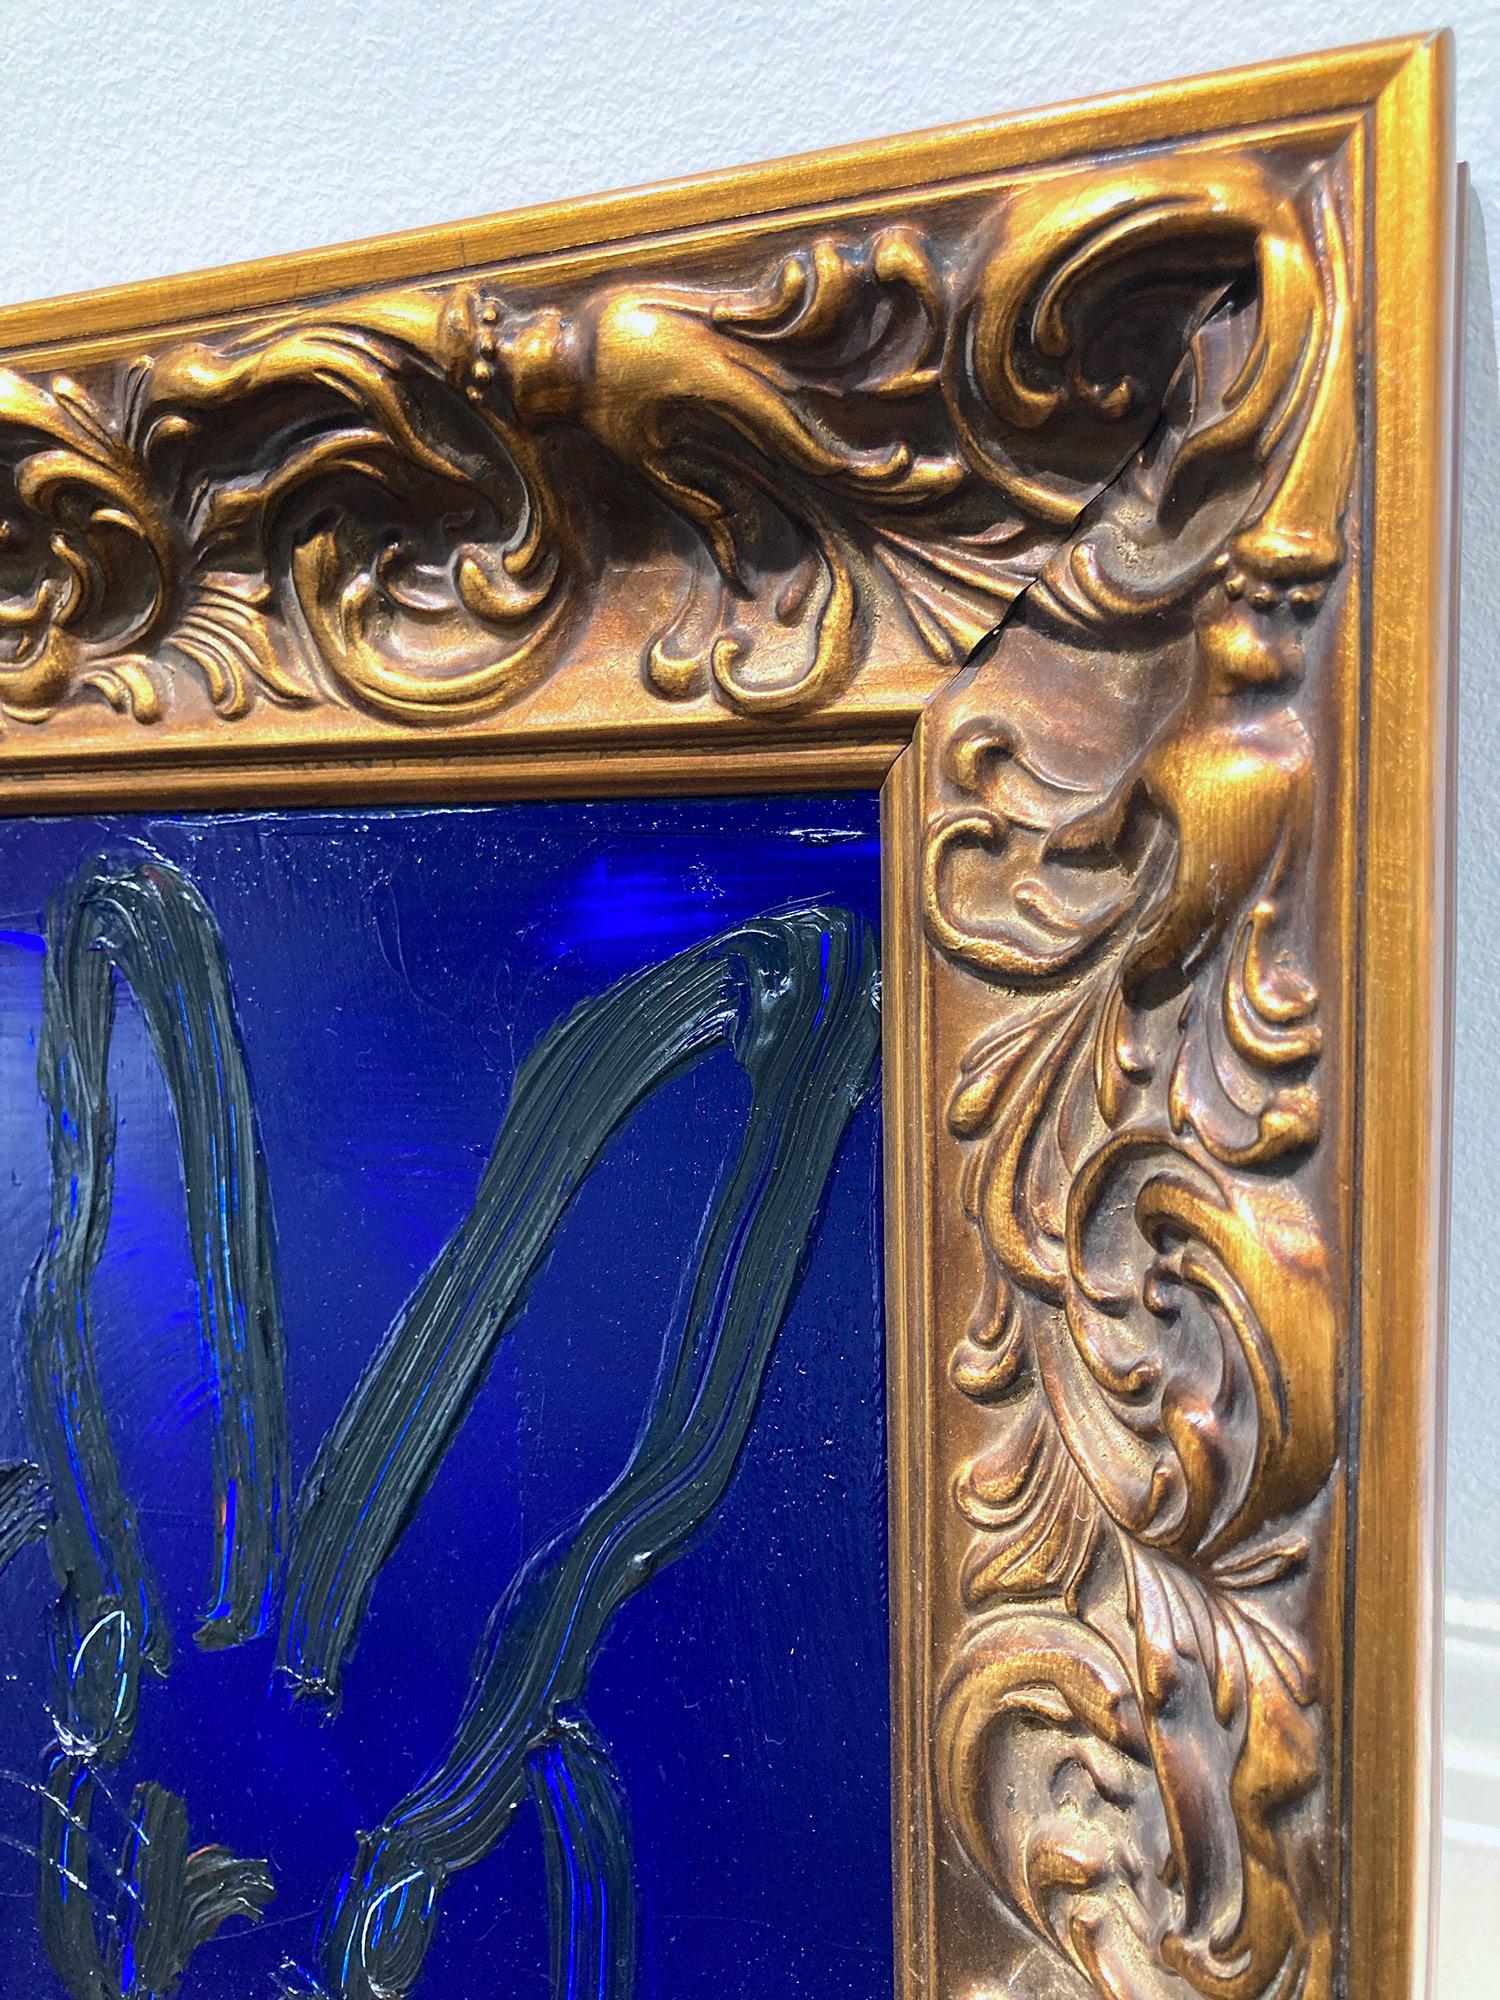 A wonderful composition of one of Slonem's most iconic subjects, Bunnies. This piece depicts a gestural figure of a black bunny on a Mid Night Blue background with thick use of paint. It is housed in a wonderful antique style wood frame. Inspired by